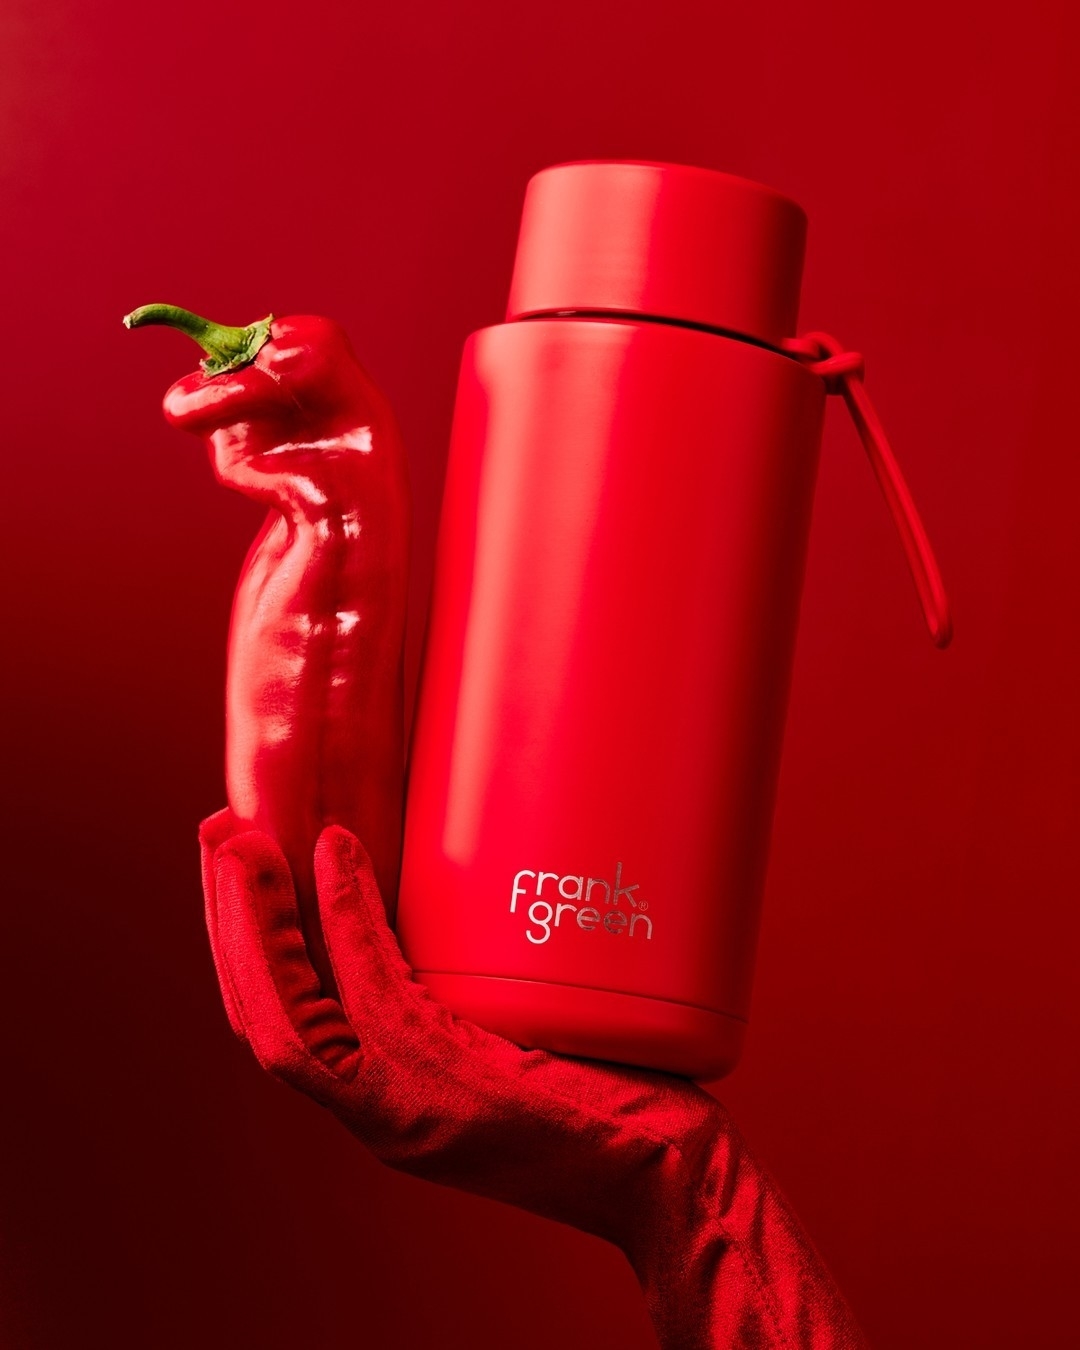 A hand in a red glove holds a red chili and a &#x27;frank green&#x27; branded reusable bottle